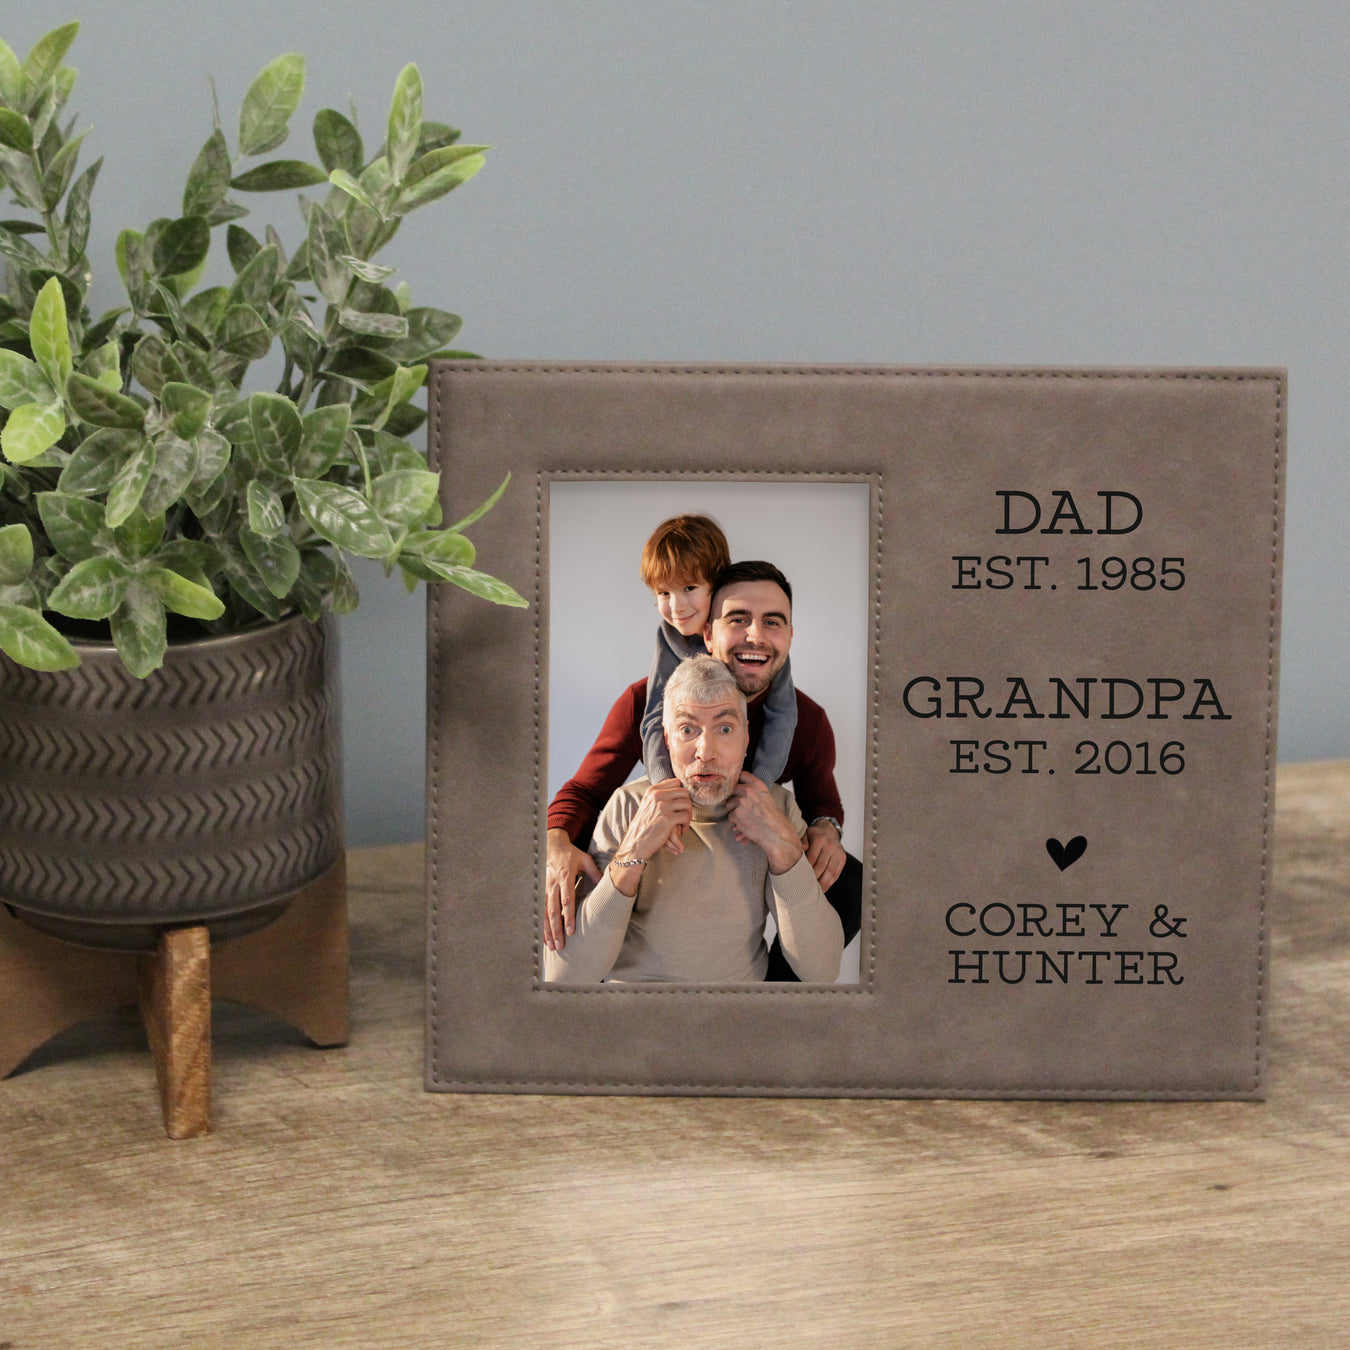 Father's Day Gifts for Grandpa